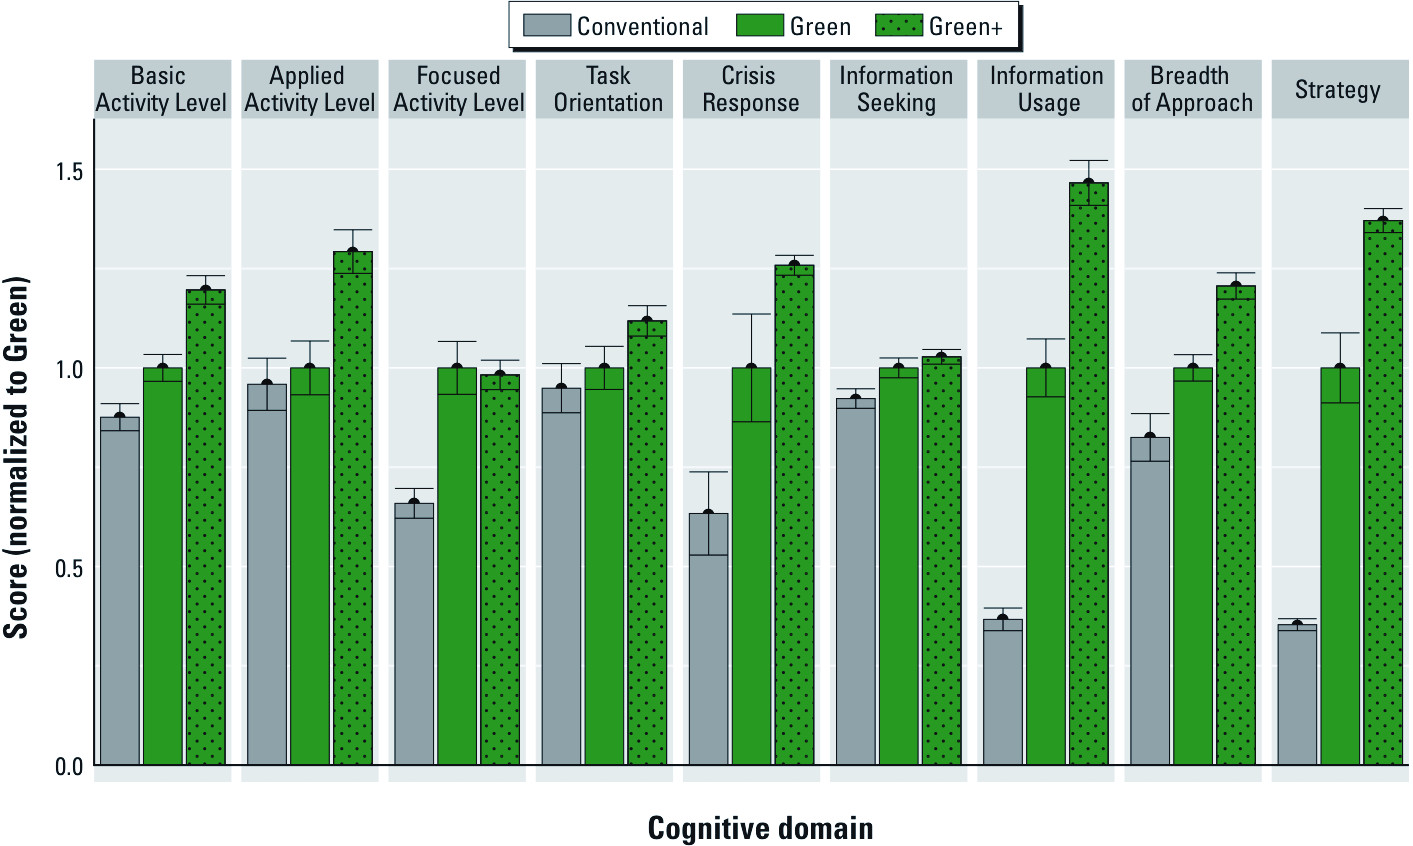 Carpet Cleaning Improves Cognitive Function by Reducing VOCs_Cognitive Function Scores